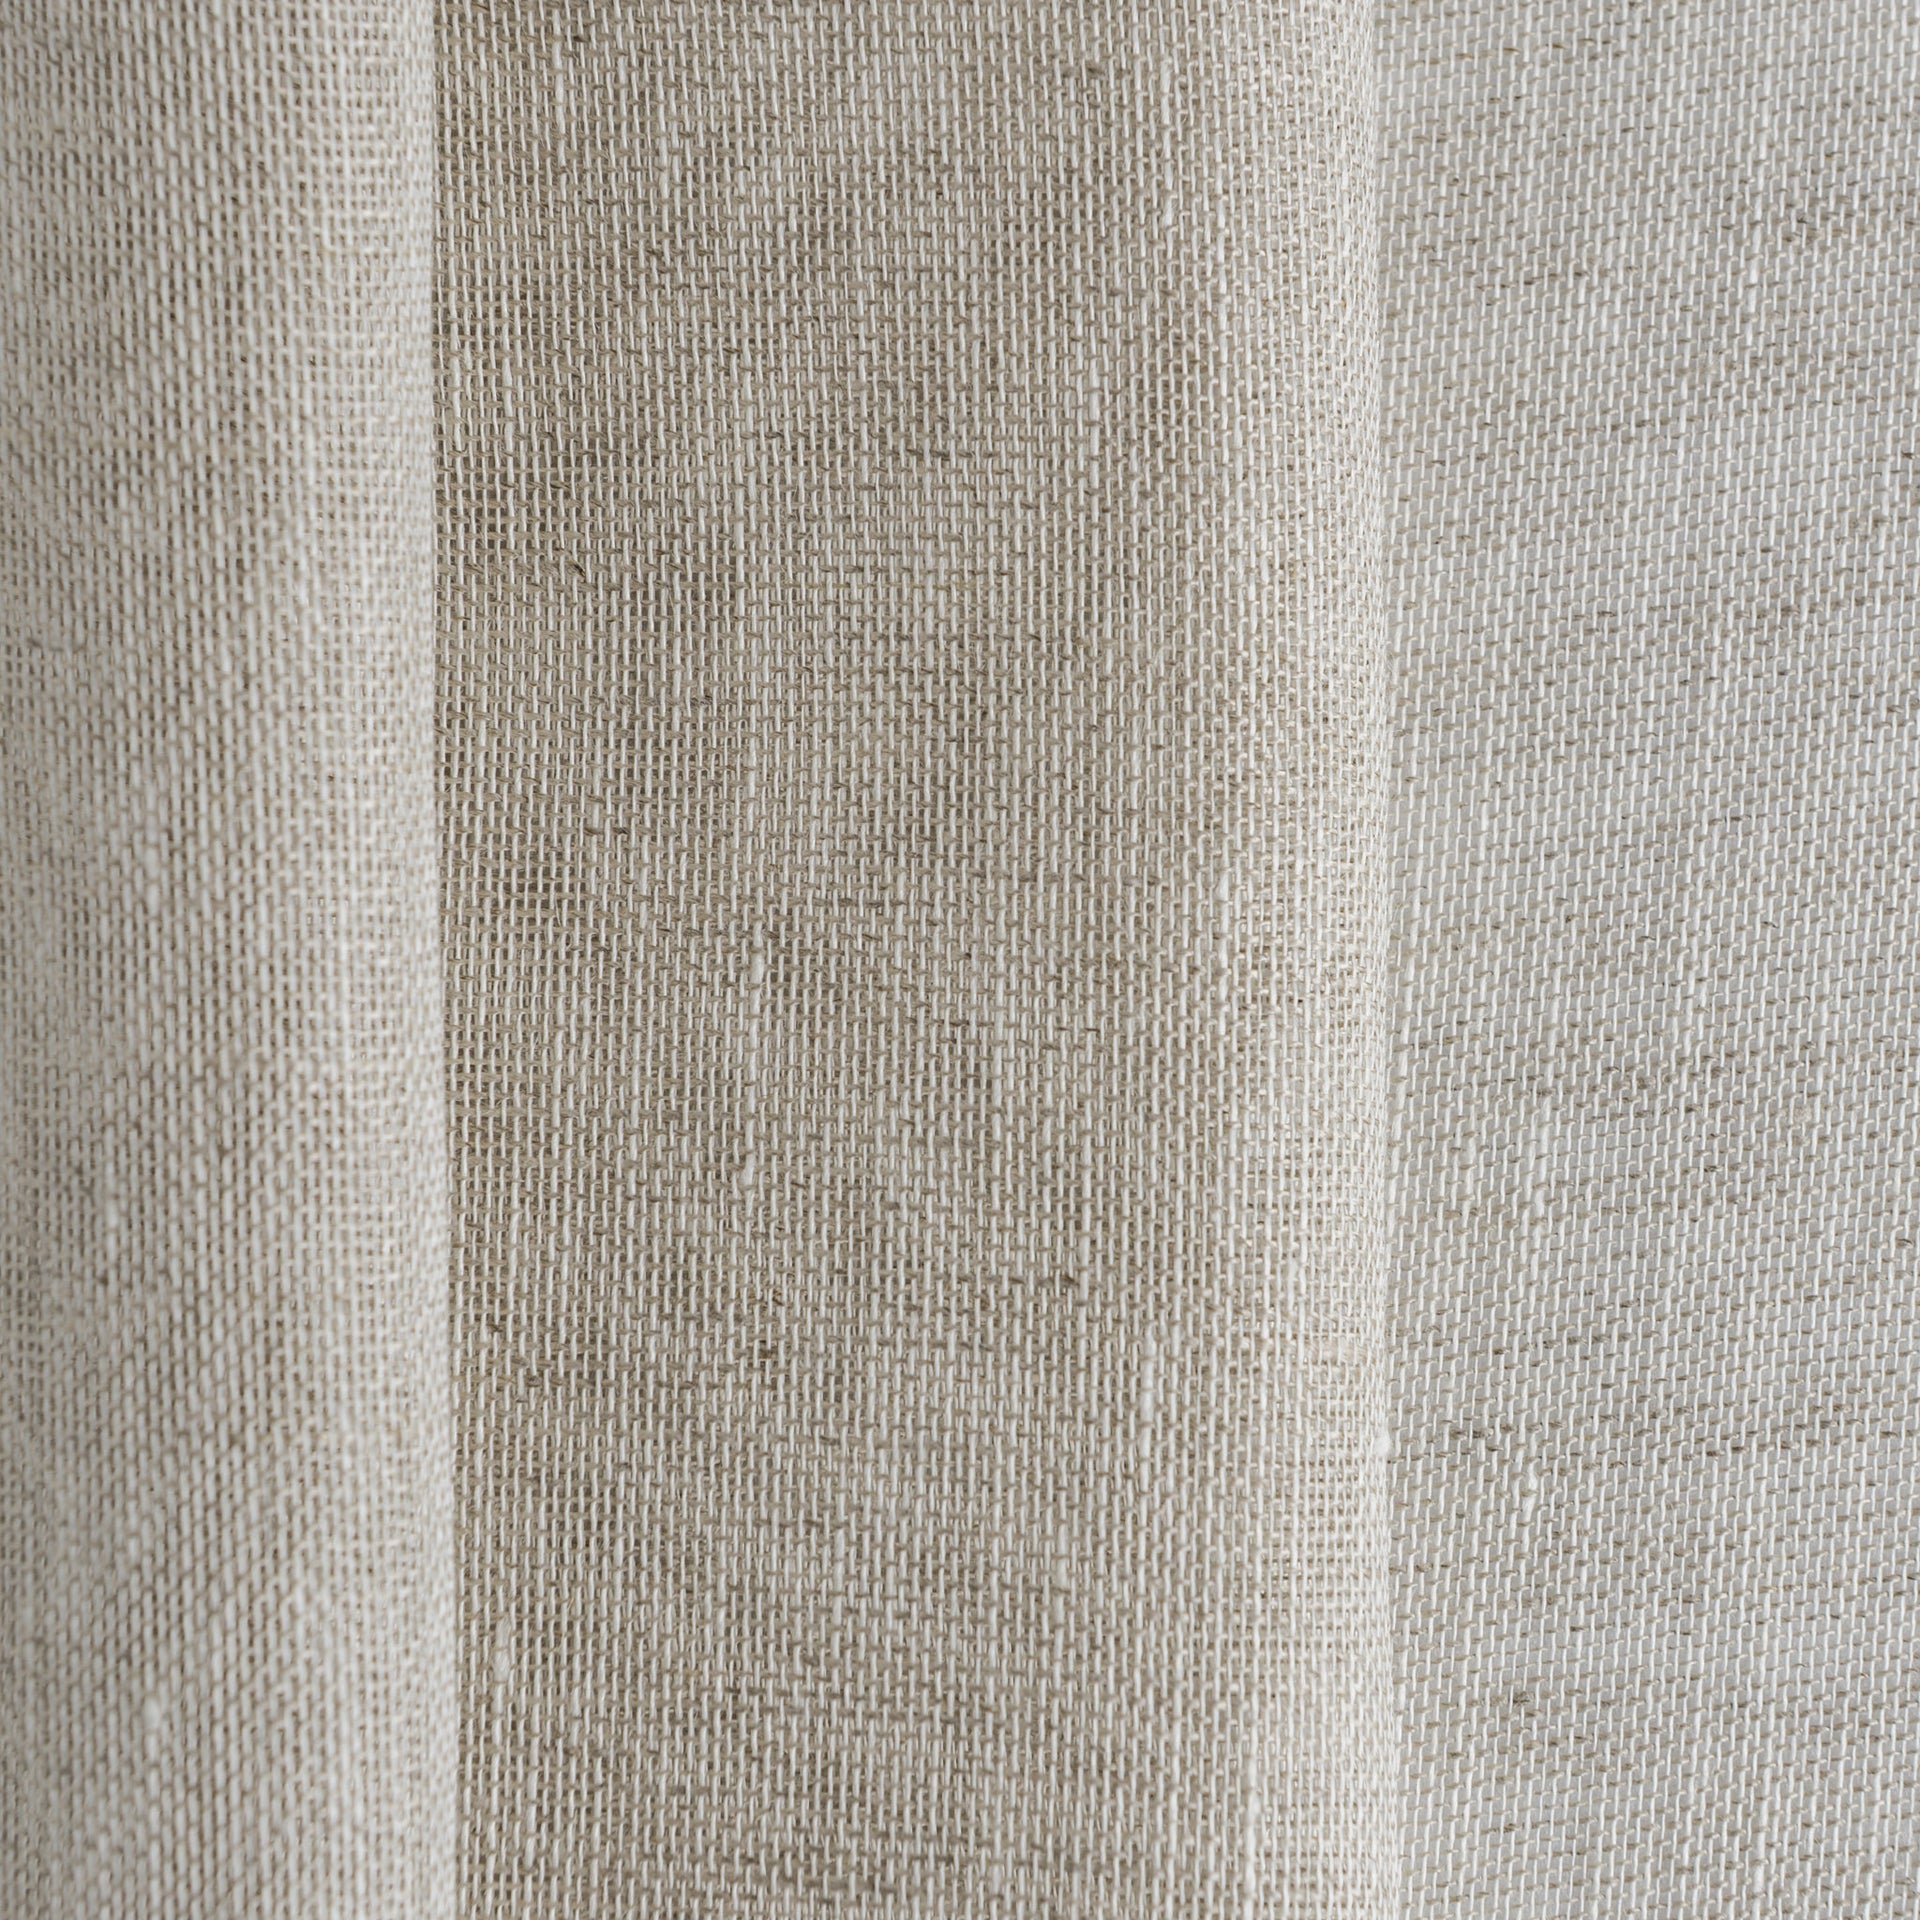 Natural Light Weight Linen Fabric by the Meter - 100% French Natural - Width 133 cm, 267 cm